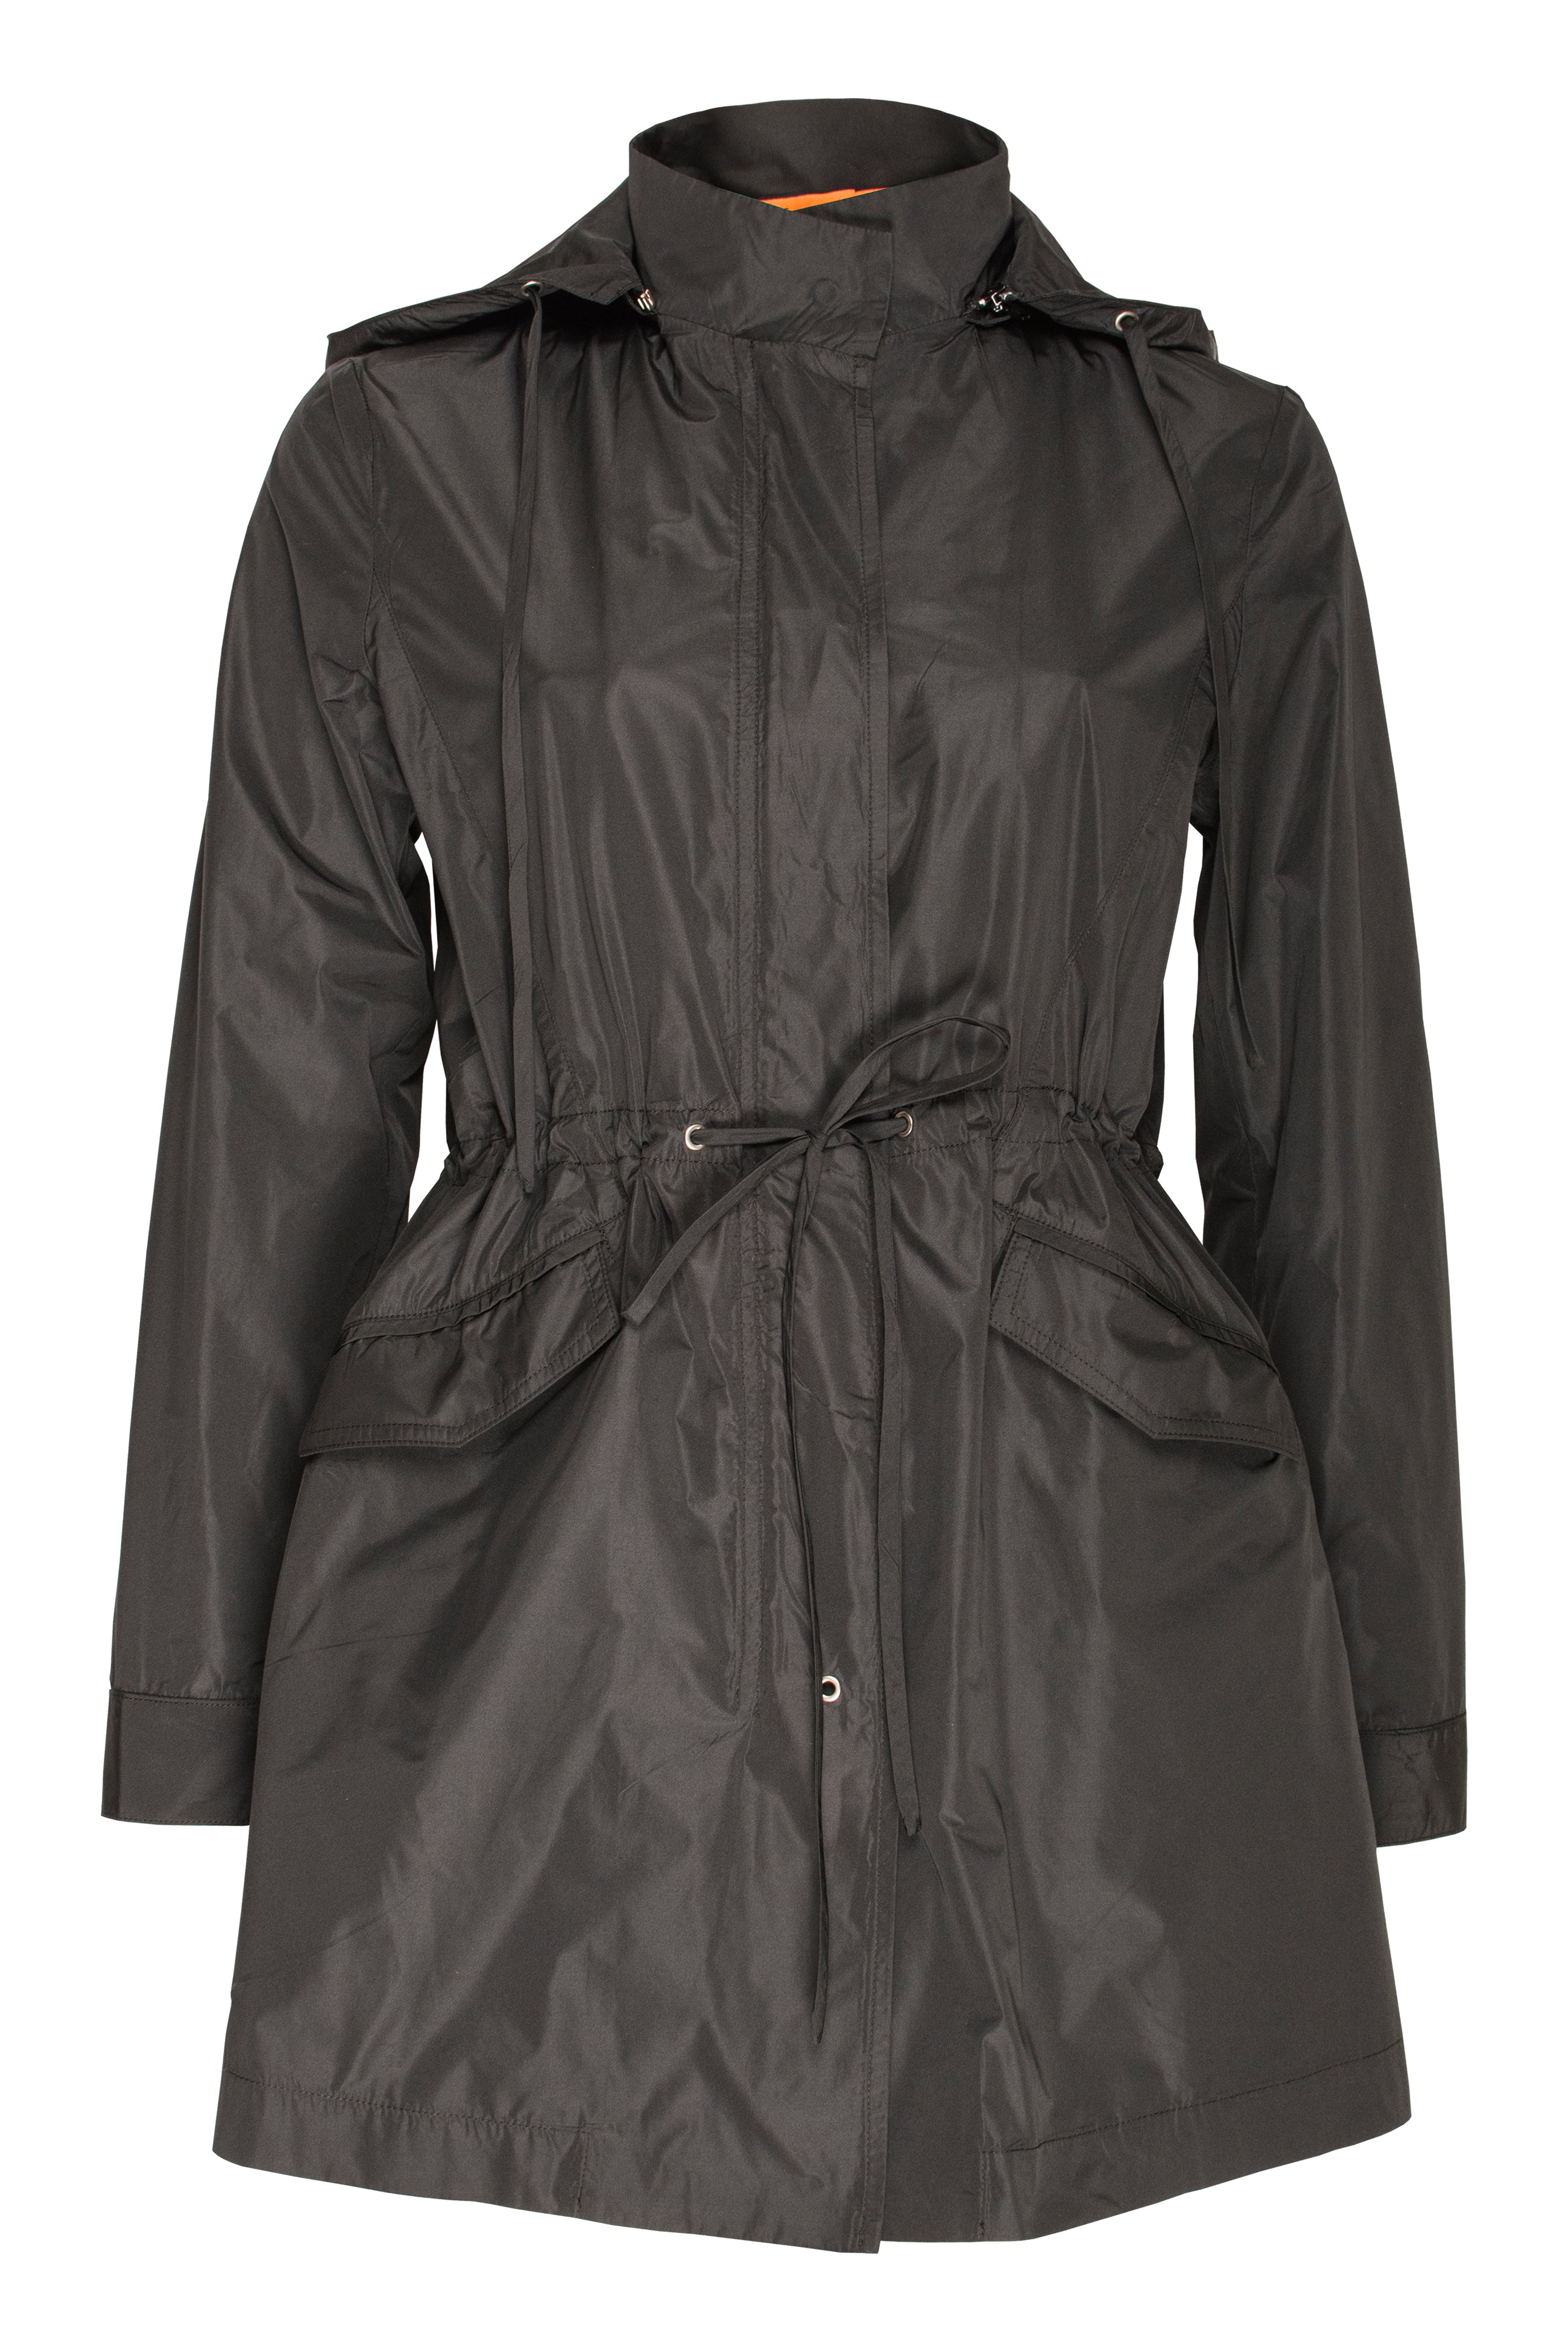 Black Detachable Hood Trench 6256 – DIGBYS Boutique